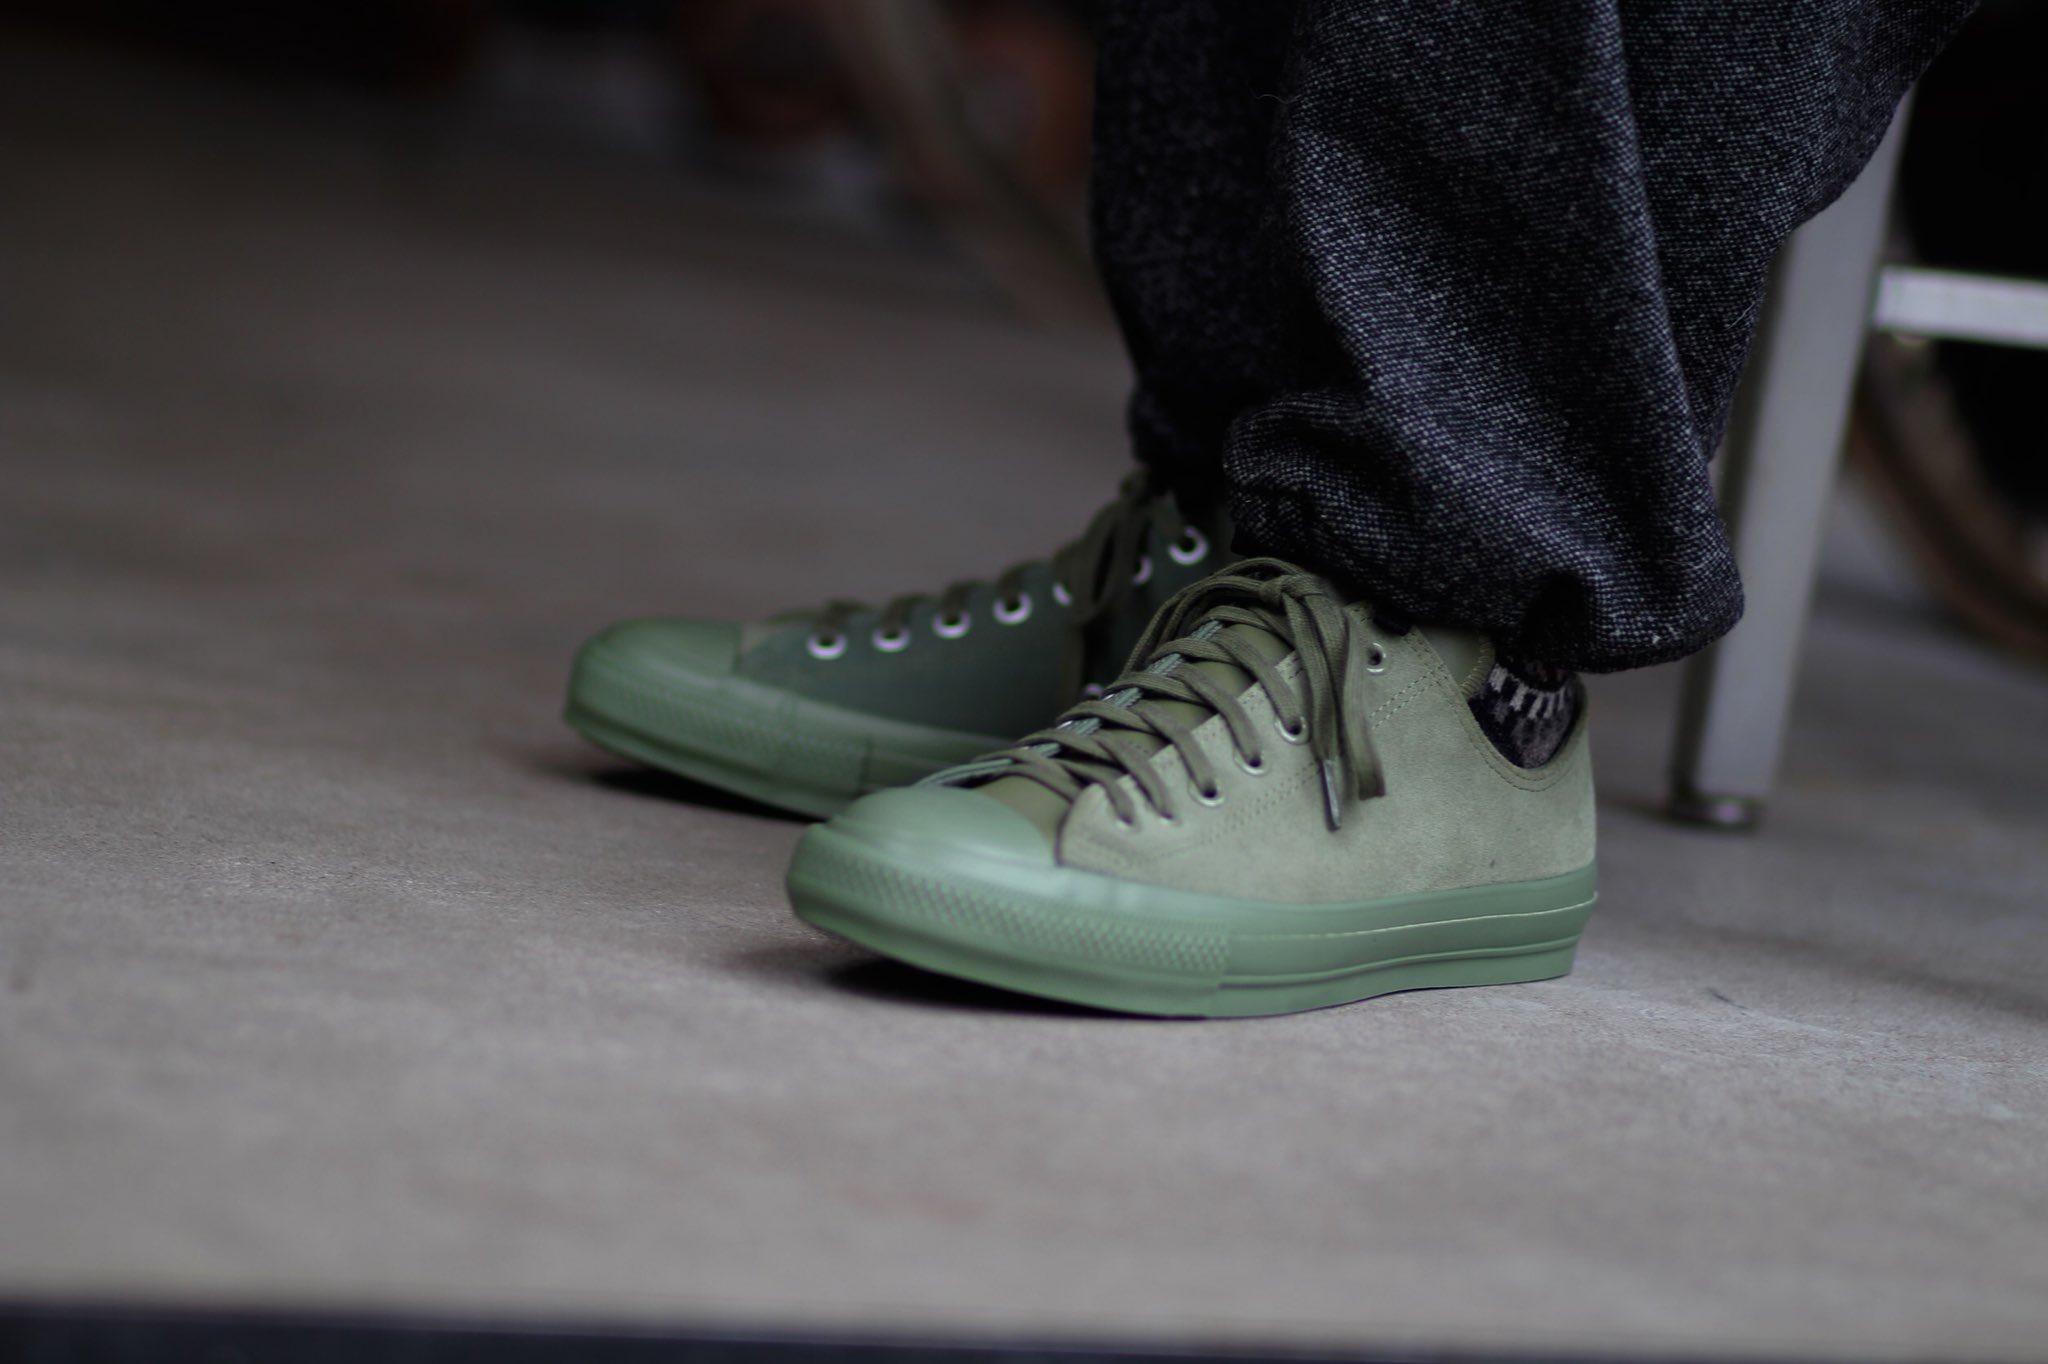 observación Inspiración inoxidable BEAMS MEN on Twitter: "Converse × Engineered Garments “ALL STAR Hi &amp;  Low” RELEASE ・ https://t.co/i9HQzqVhfo ・ #engineeredgarments #converse  #beams #beamsplus #beamsboy #allstar #olive https://t.co/pWOUOW9Q3f" /  Twitter